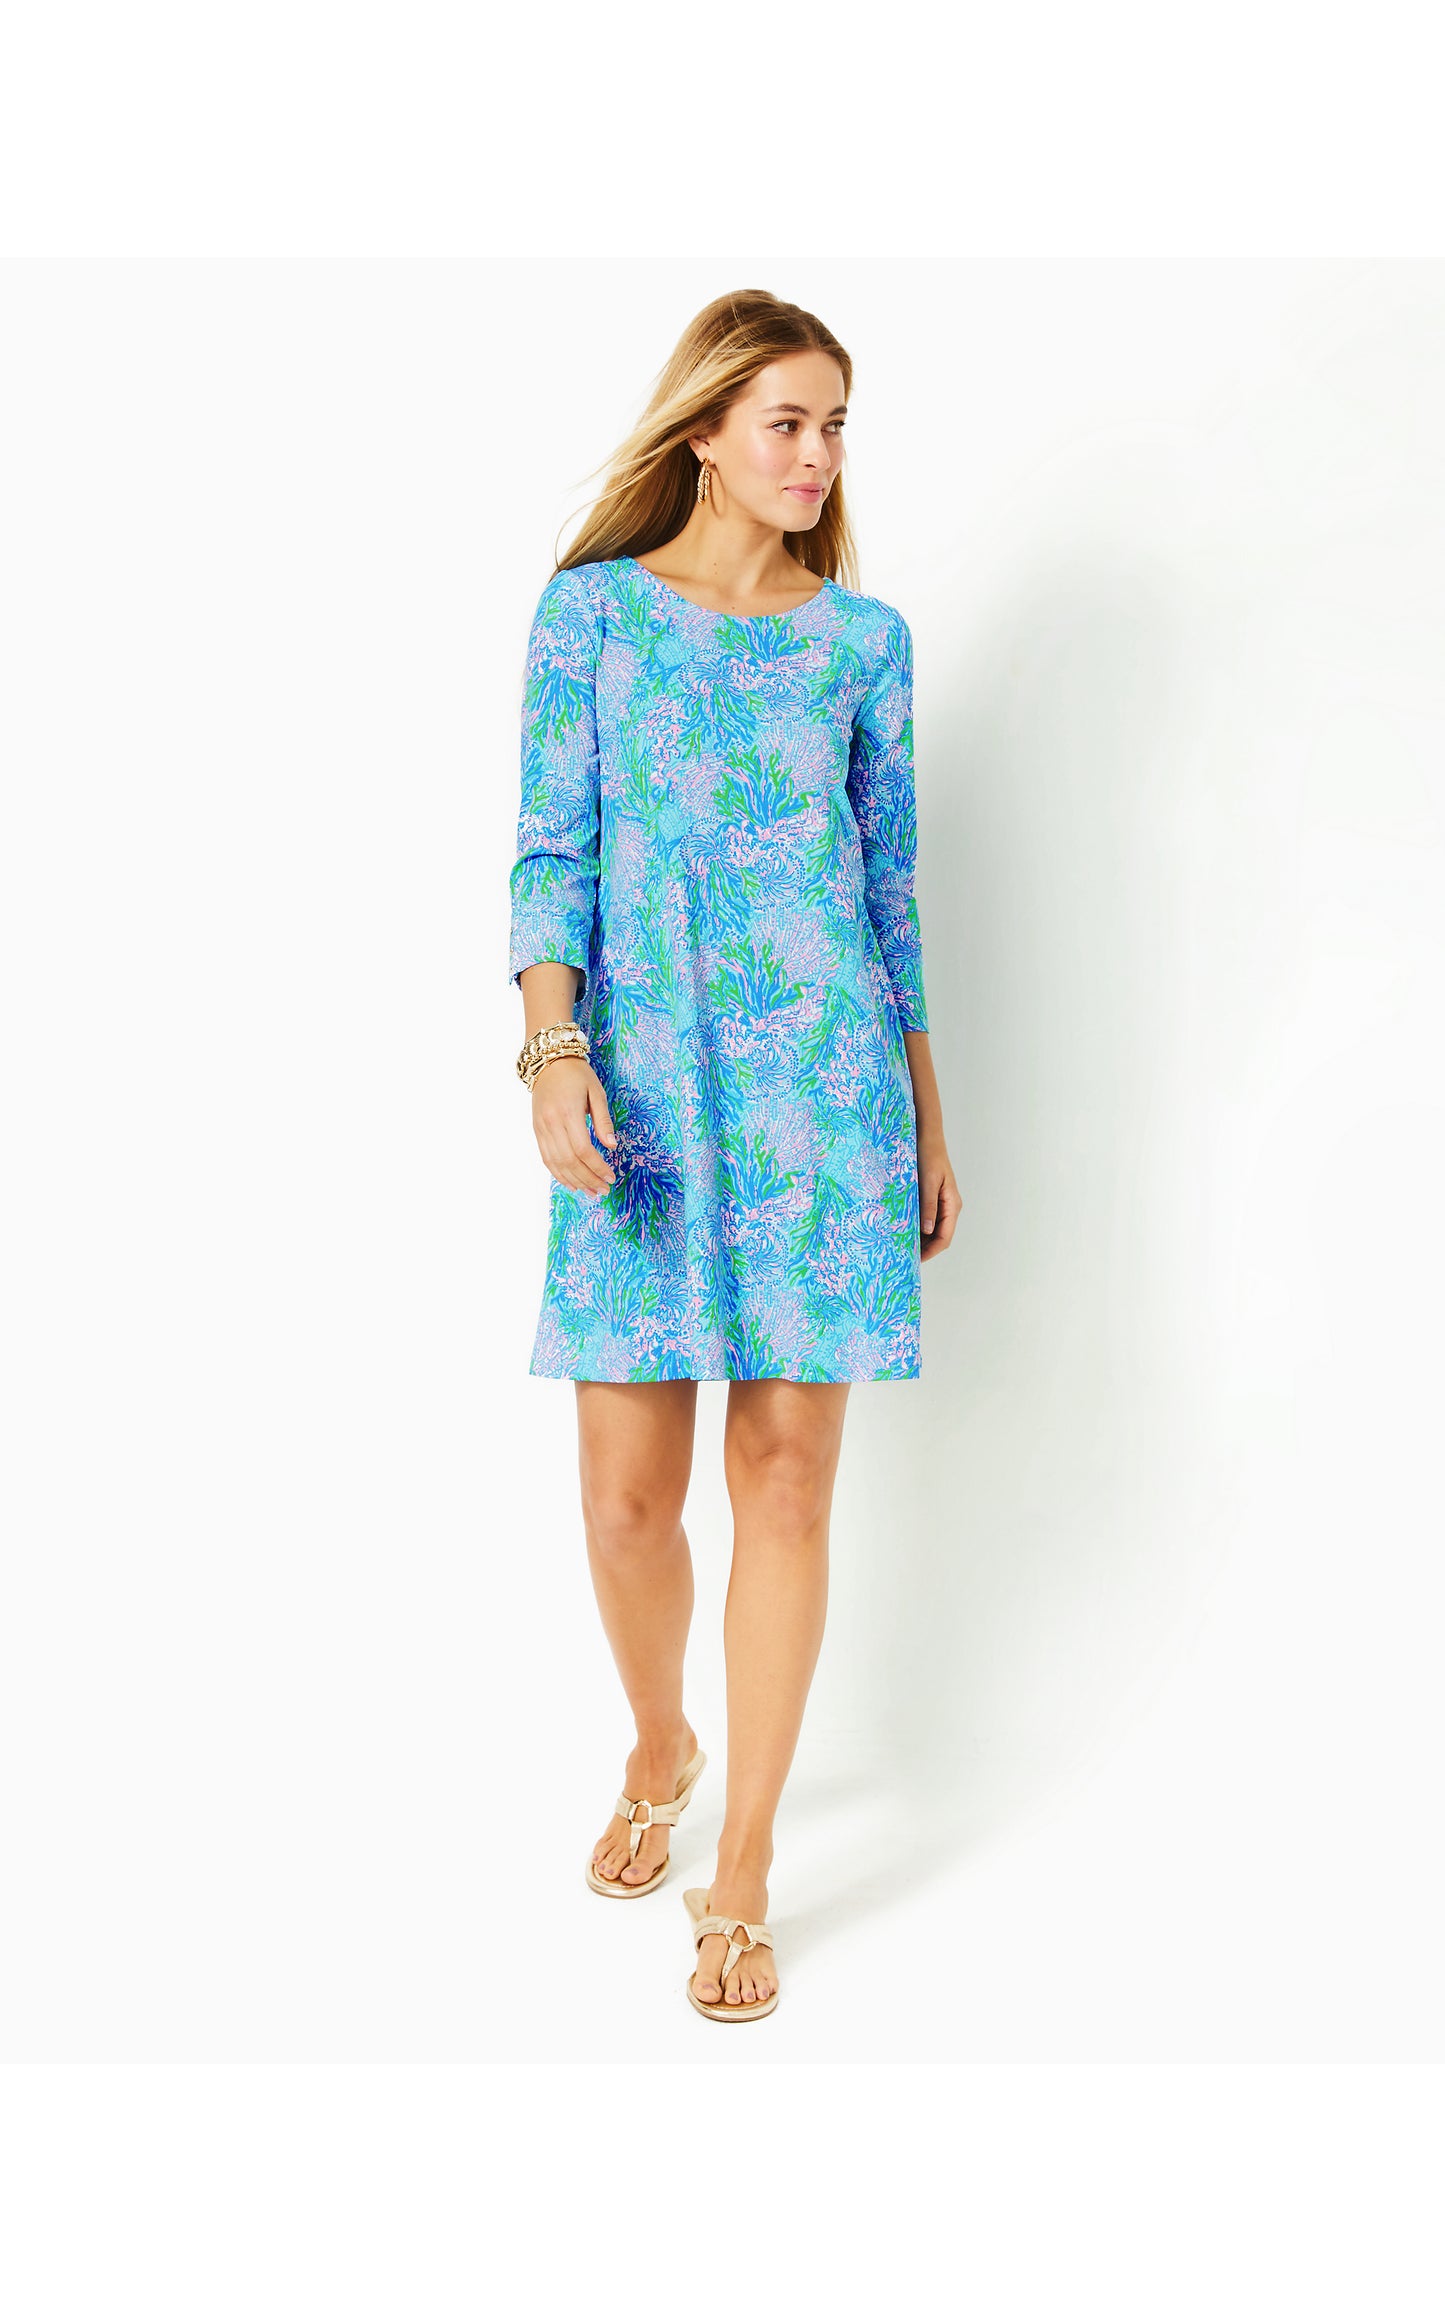 UPF 50+ Solia Chillylilly Dress in Las Olas Aqua Strong Current Sea